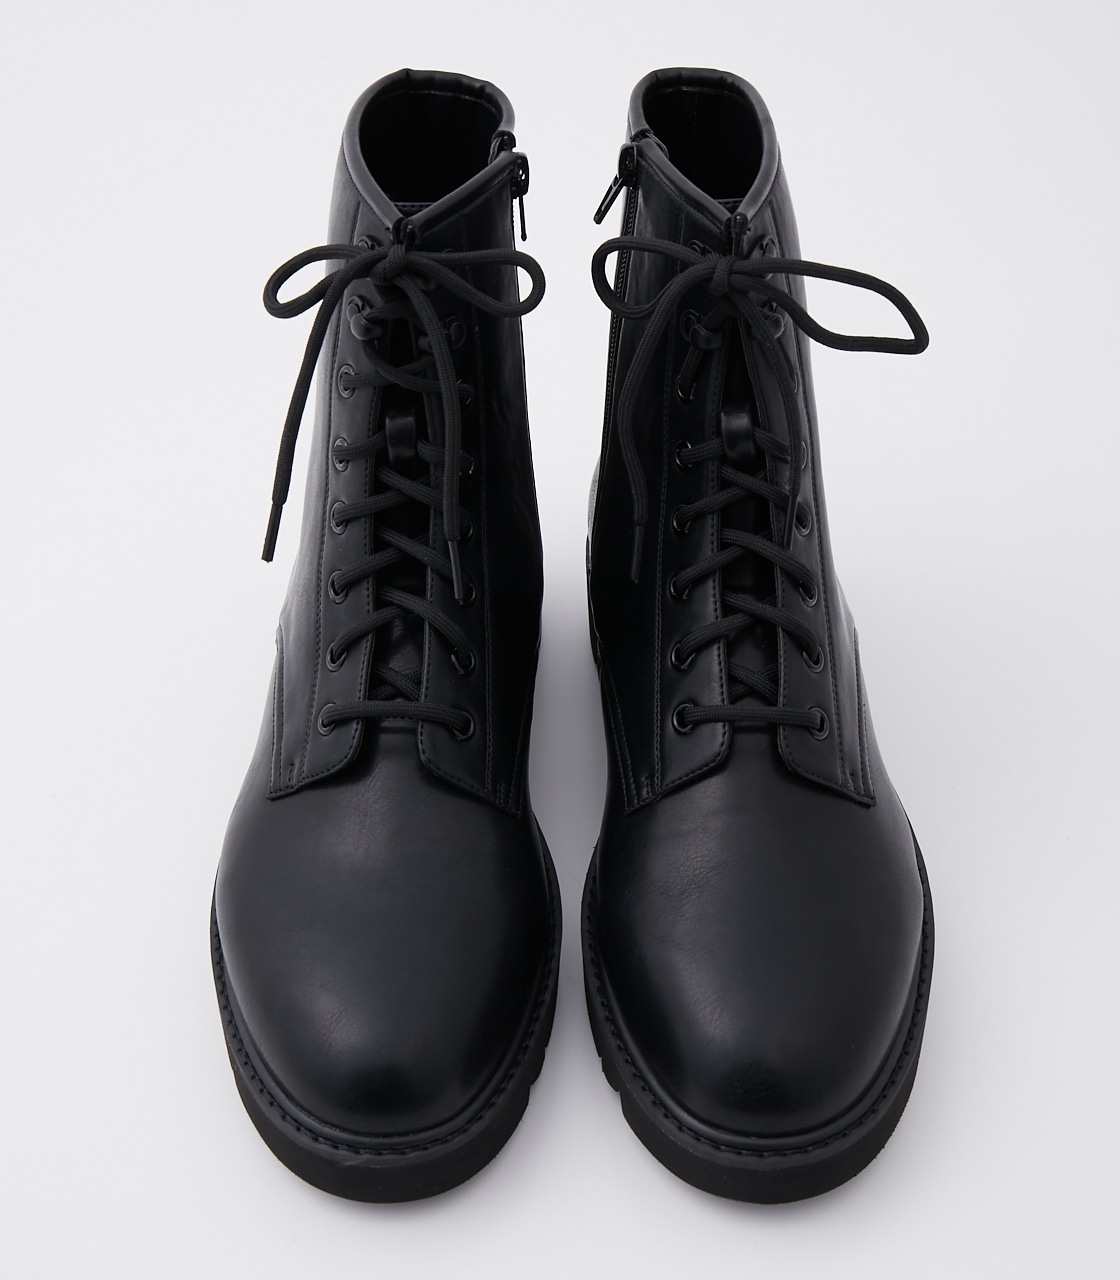 LACE UP BOOTS/レースアップブーツ 詳細画像 BLK 3